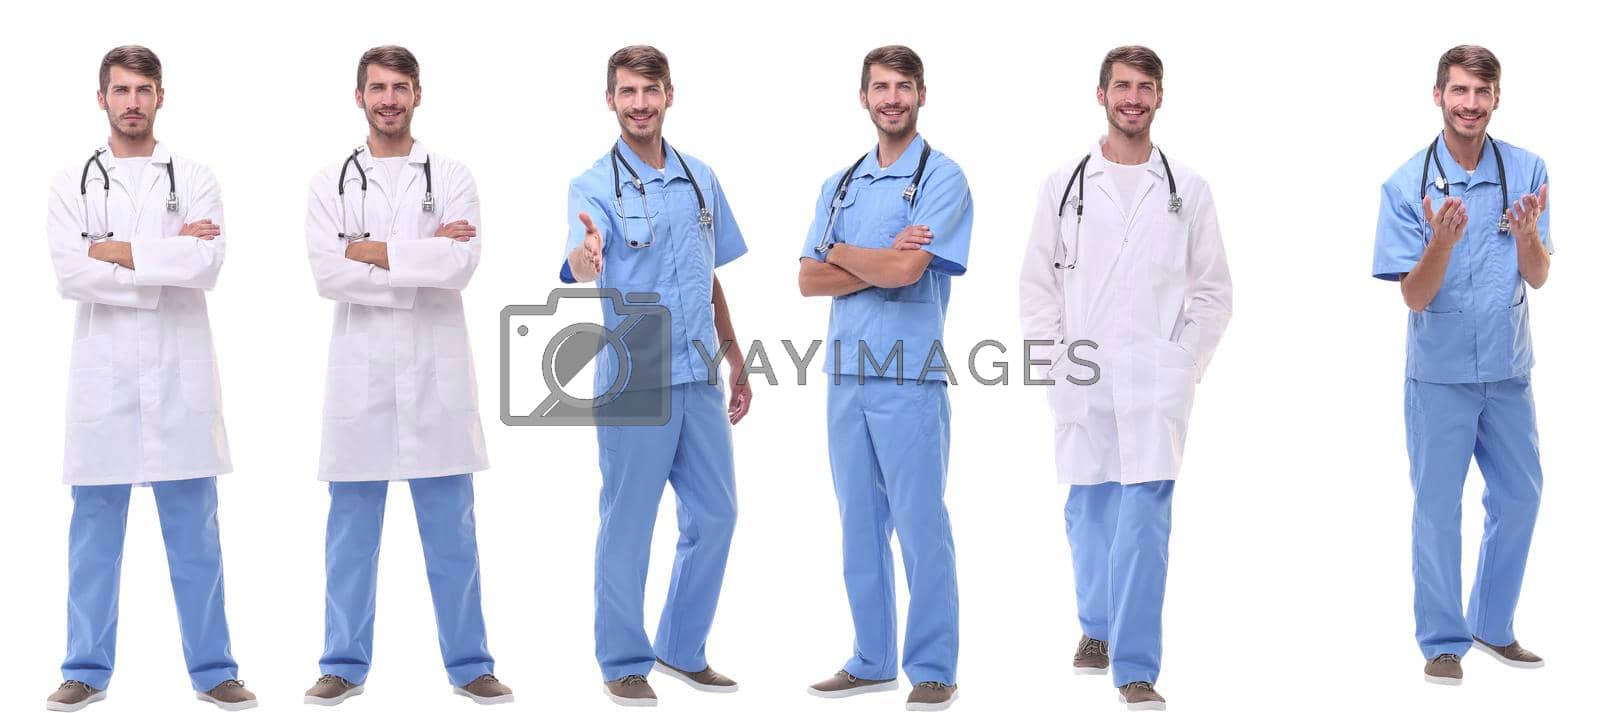 Royalty free image of group of medical doctors standing in a row by asdf